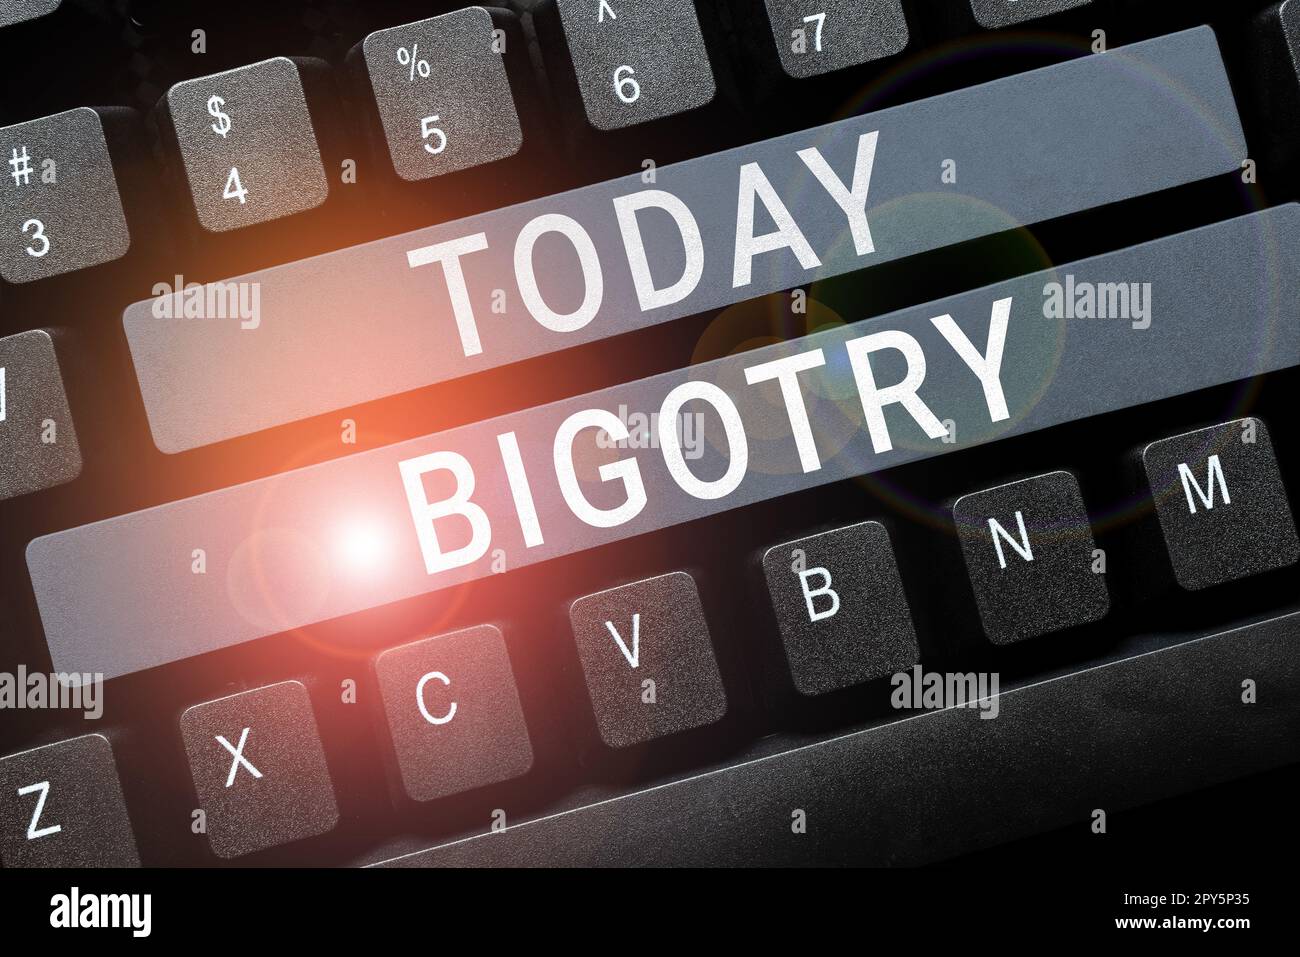 Text sign showing Bigotry. Concept meaning obstinate or intolerant devotion to one's own opinions and prejudices Stock Photo